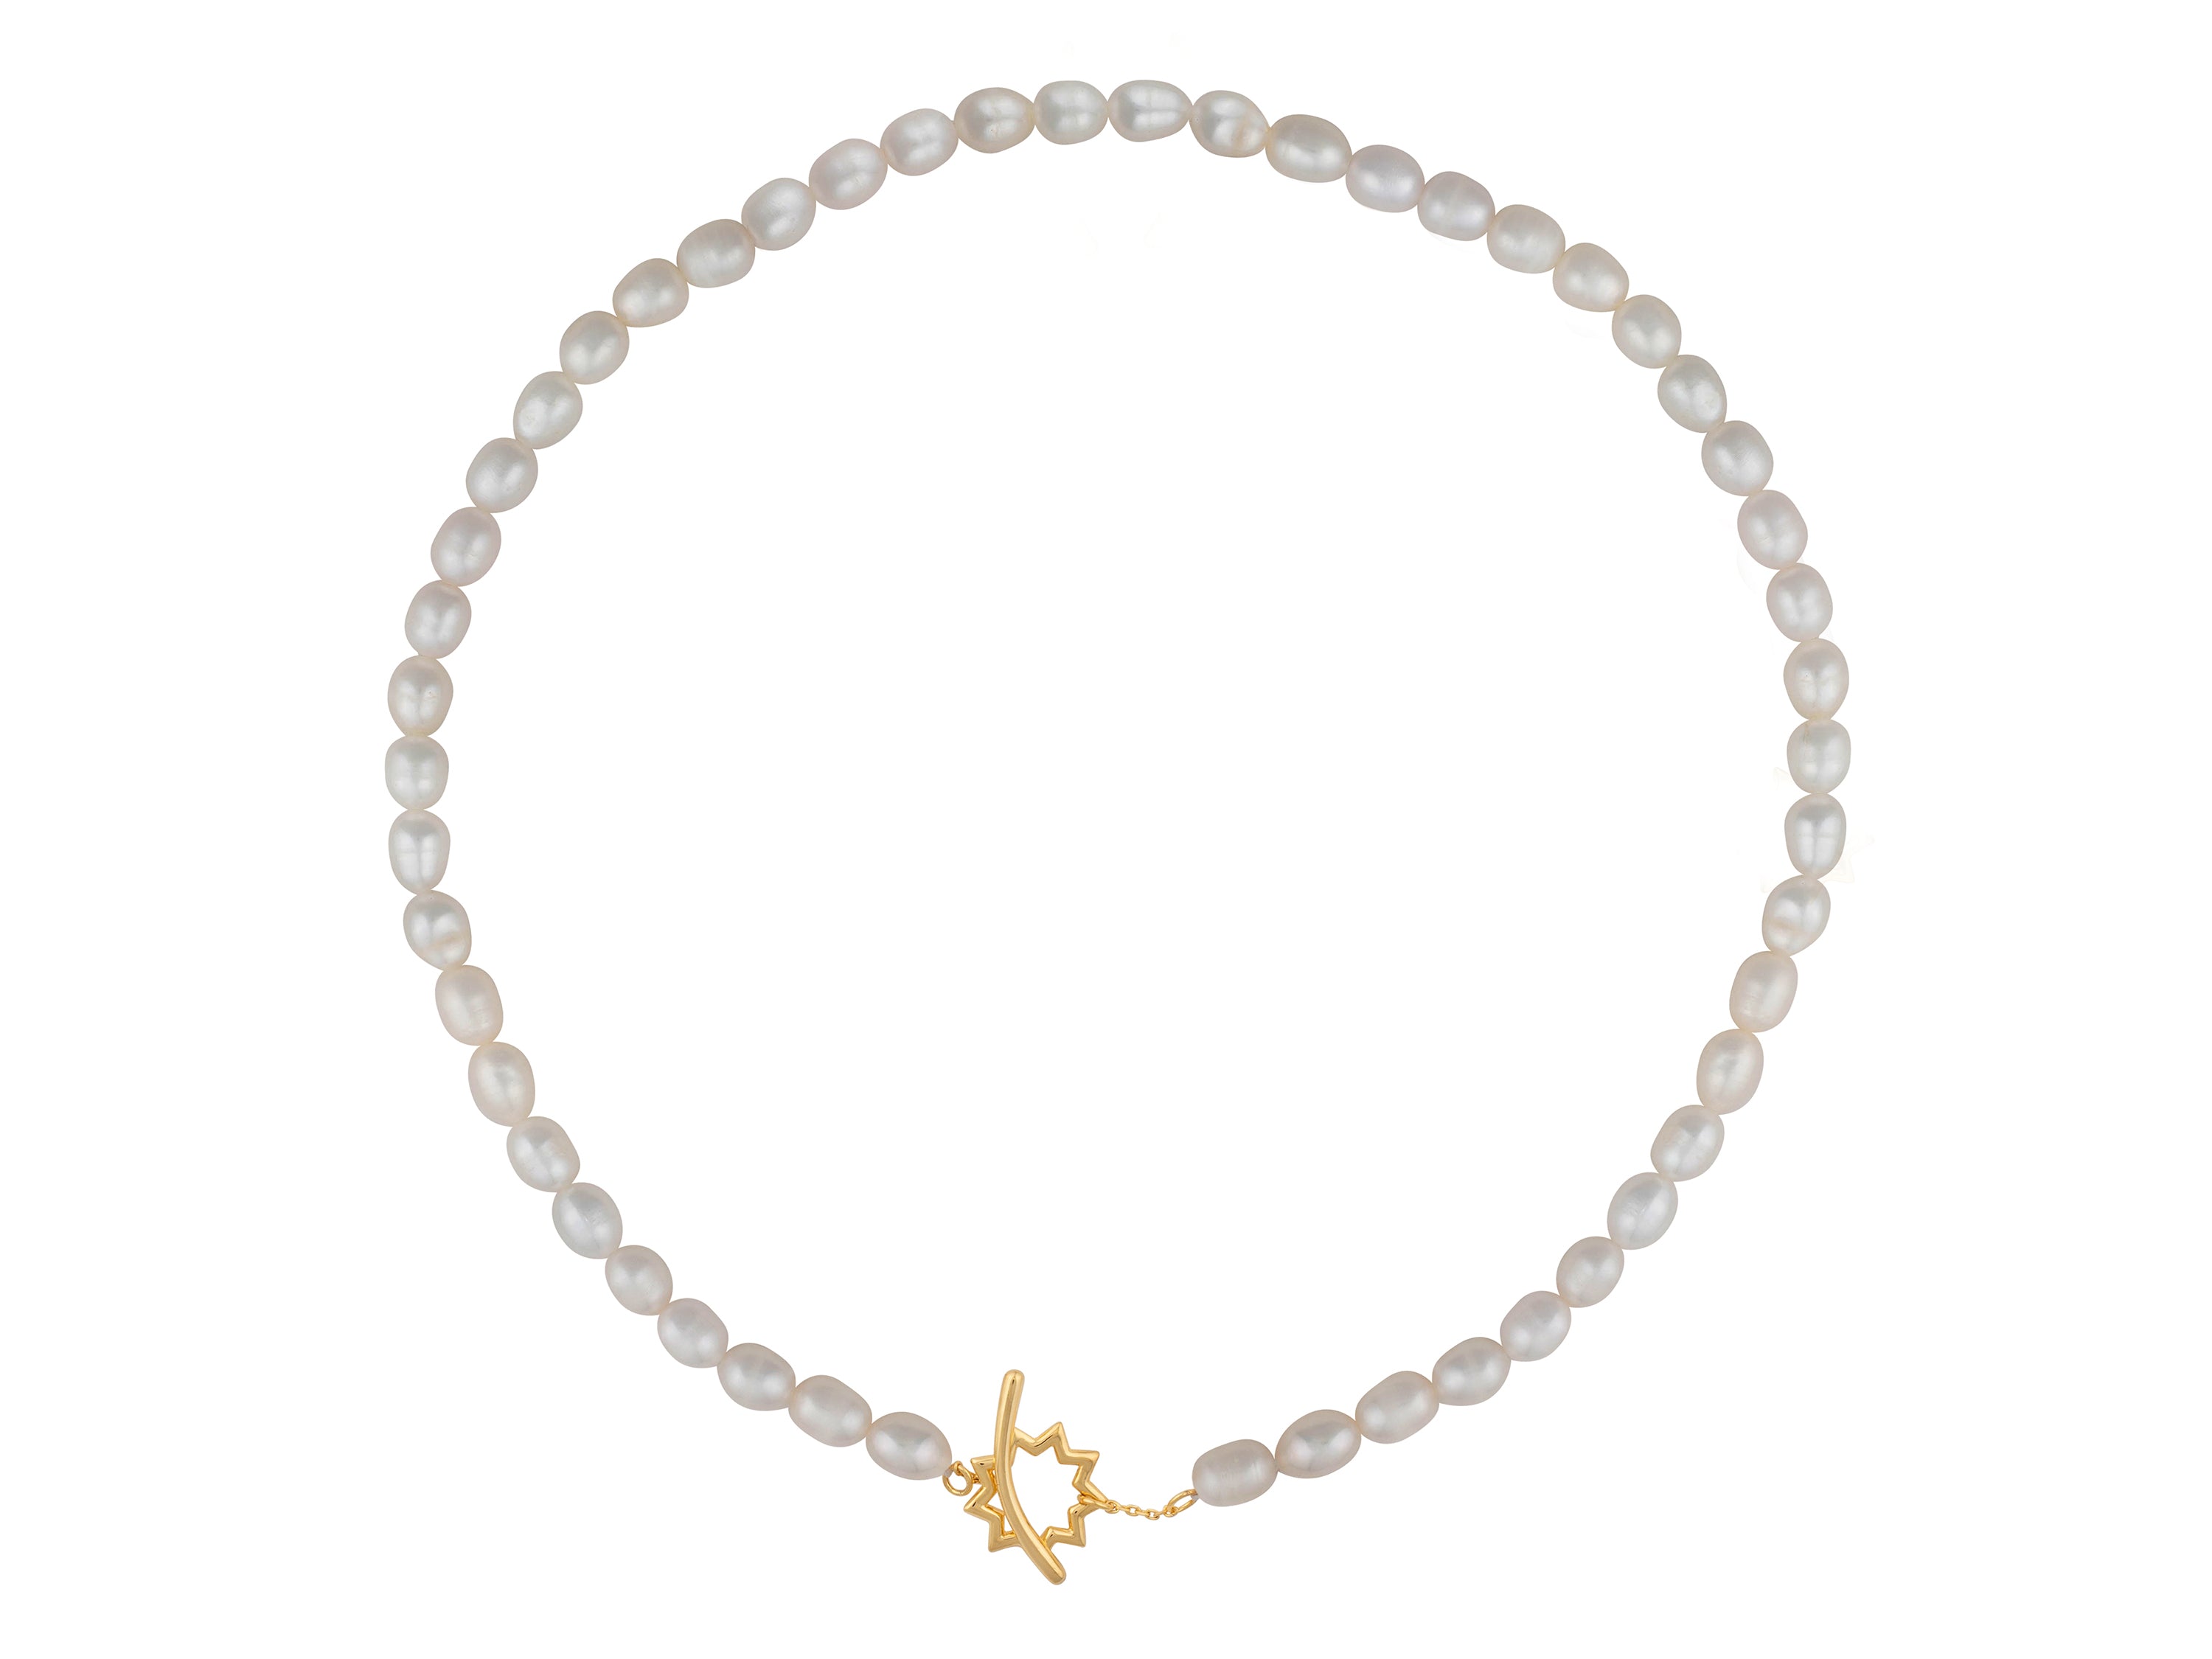 Bahai nine star outline gold toggle clasp on oval freshwater pearl necklace 